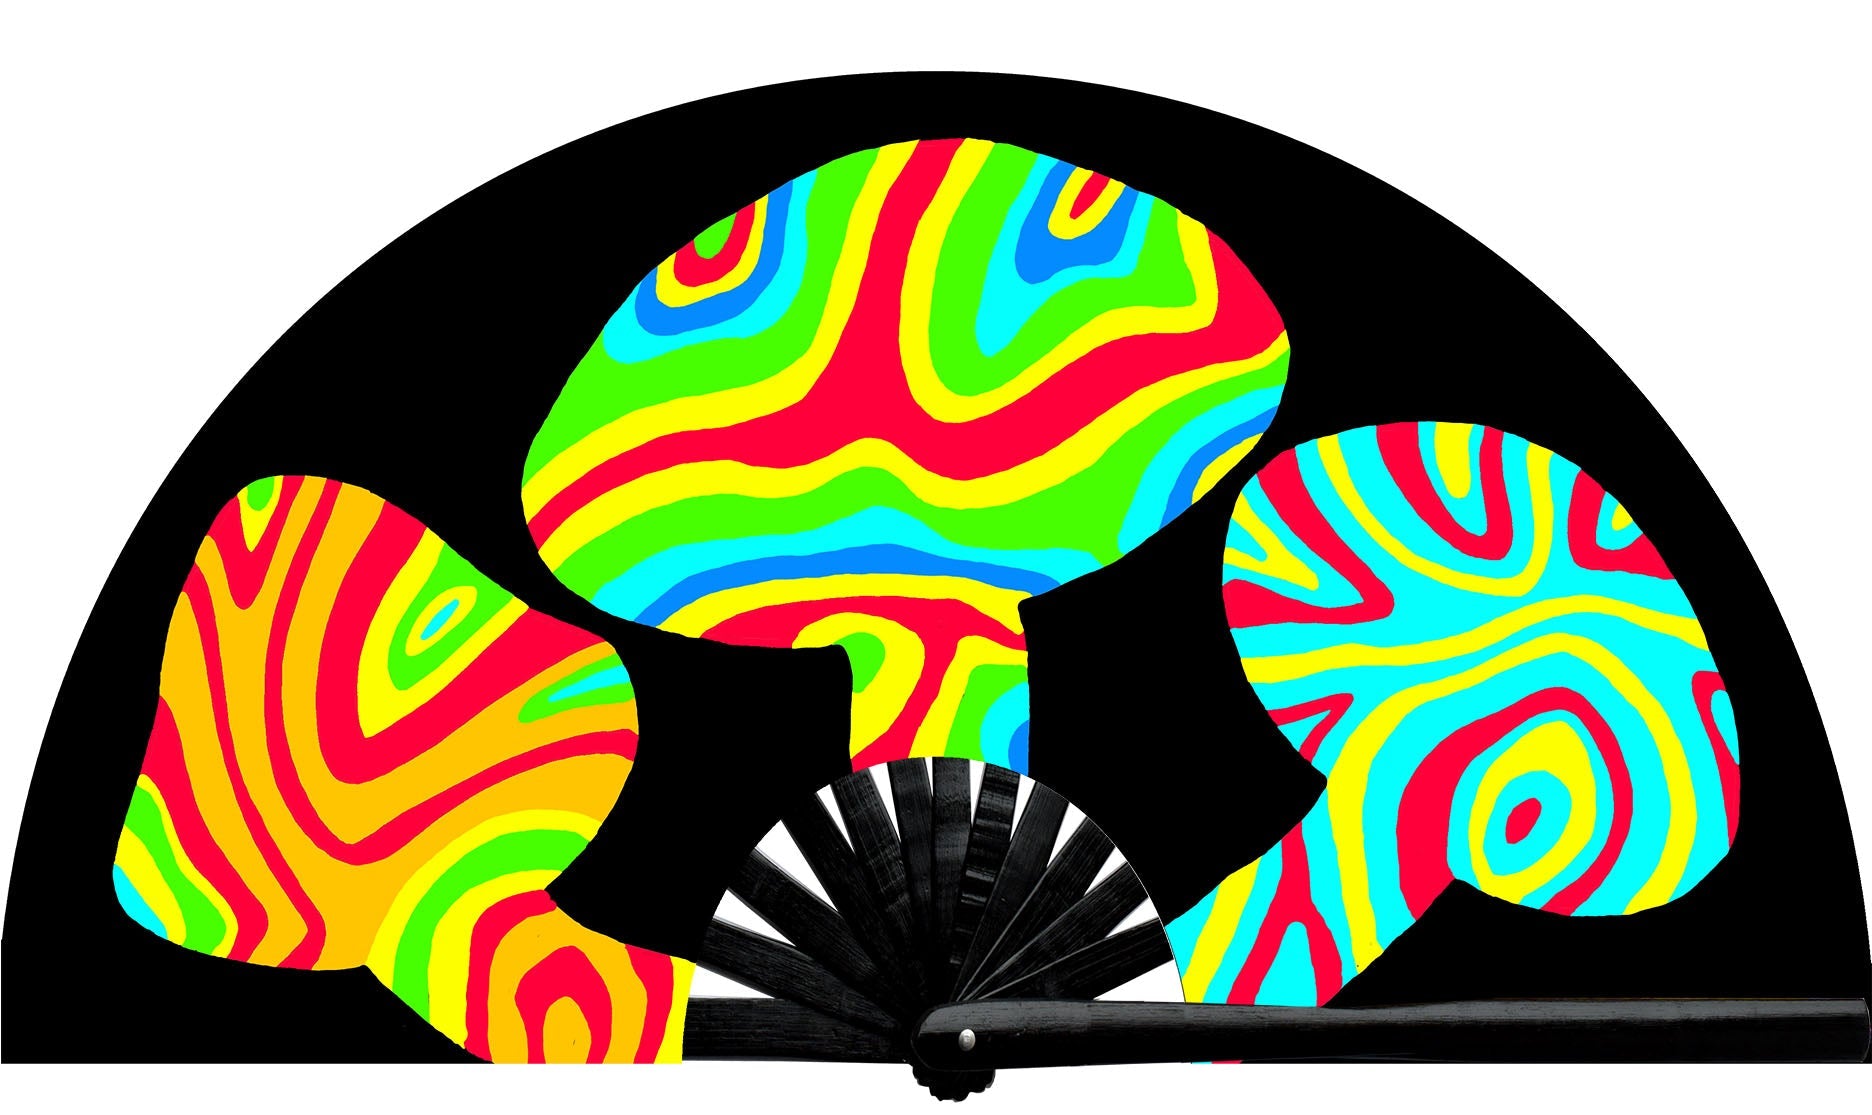 Rave Neon Magic Mushroom fan, from Suliman Nawid's Stained Canvas Collection, by Wear It!  Blacklight / UV responsive!  Find your party accessories for your next rave, music festival, circuit party, or night out at the club at Wear It Apparel! The only place for custom hand fans, plastic fans, bamboo fans, and metal hand fans, neon parasols, and custom parasols and the only place for neon & blacklight fans and parasols. Clack that fan away. #NowWearIt #Clackthatfan